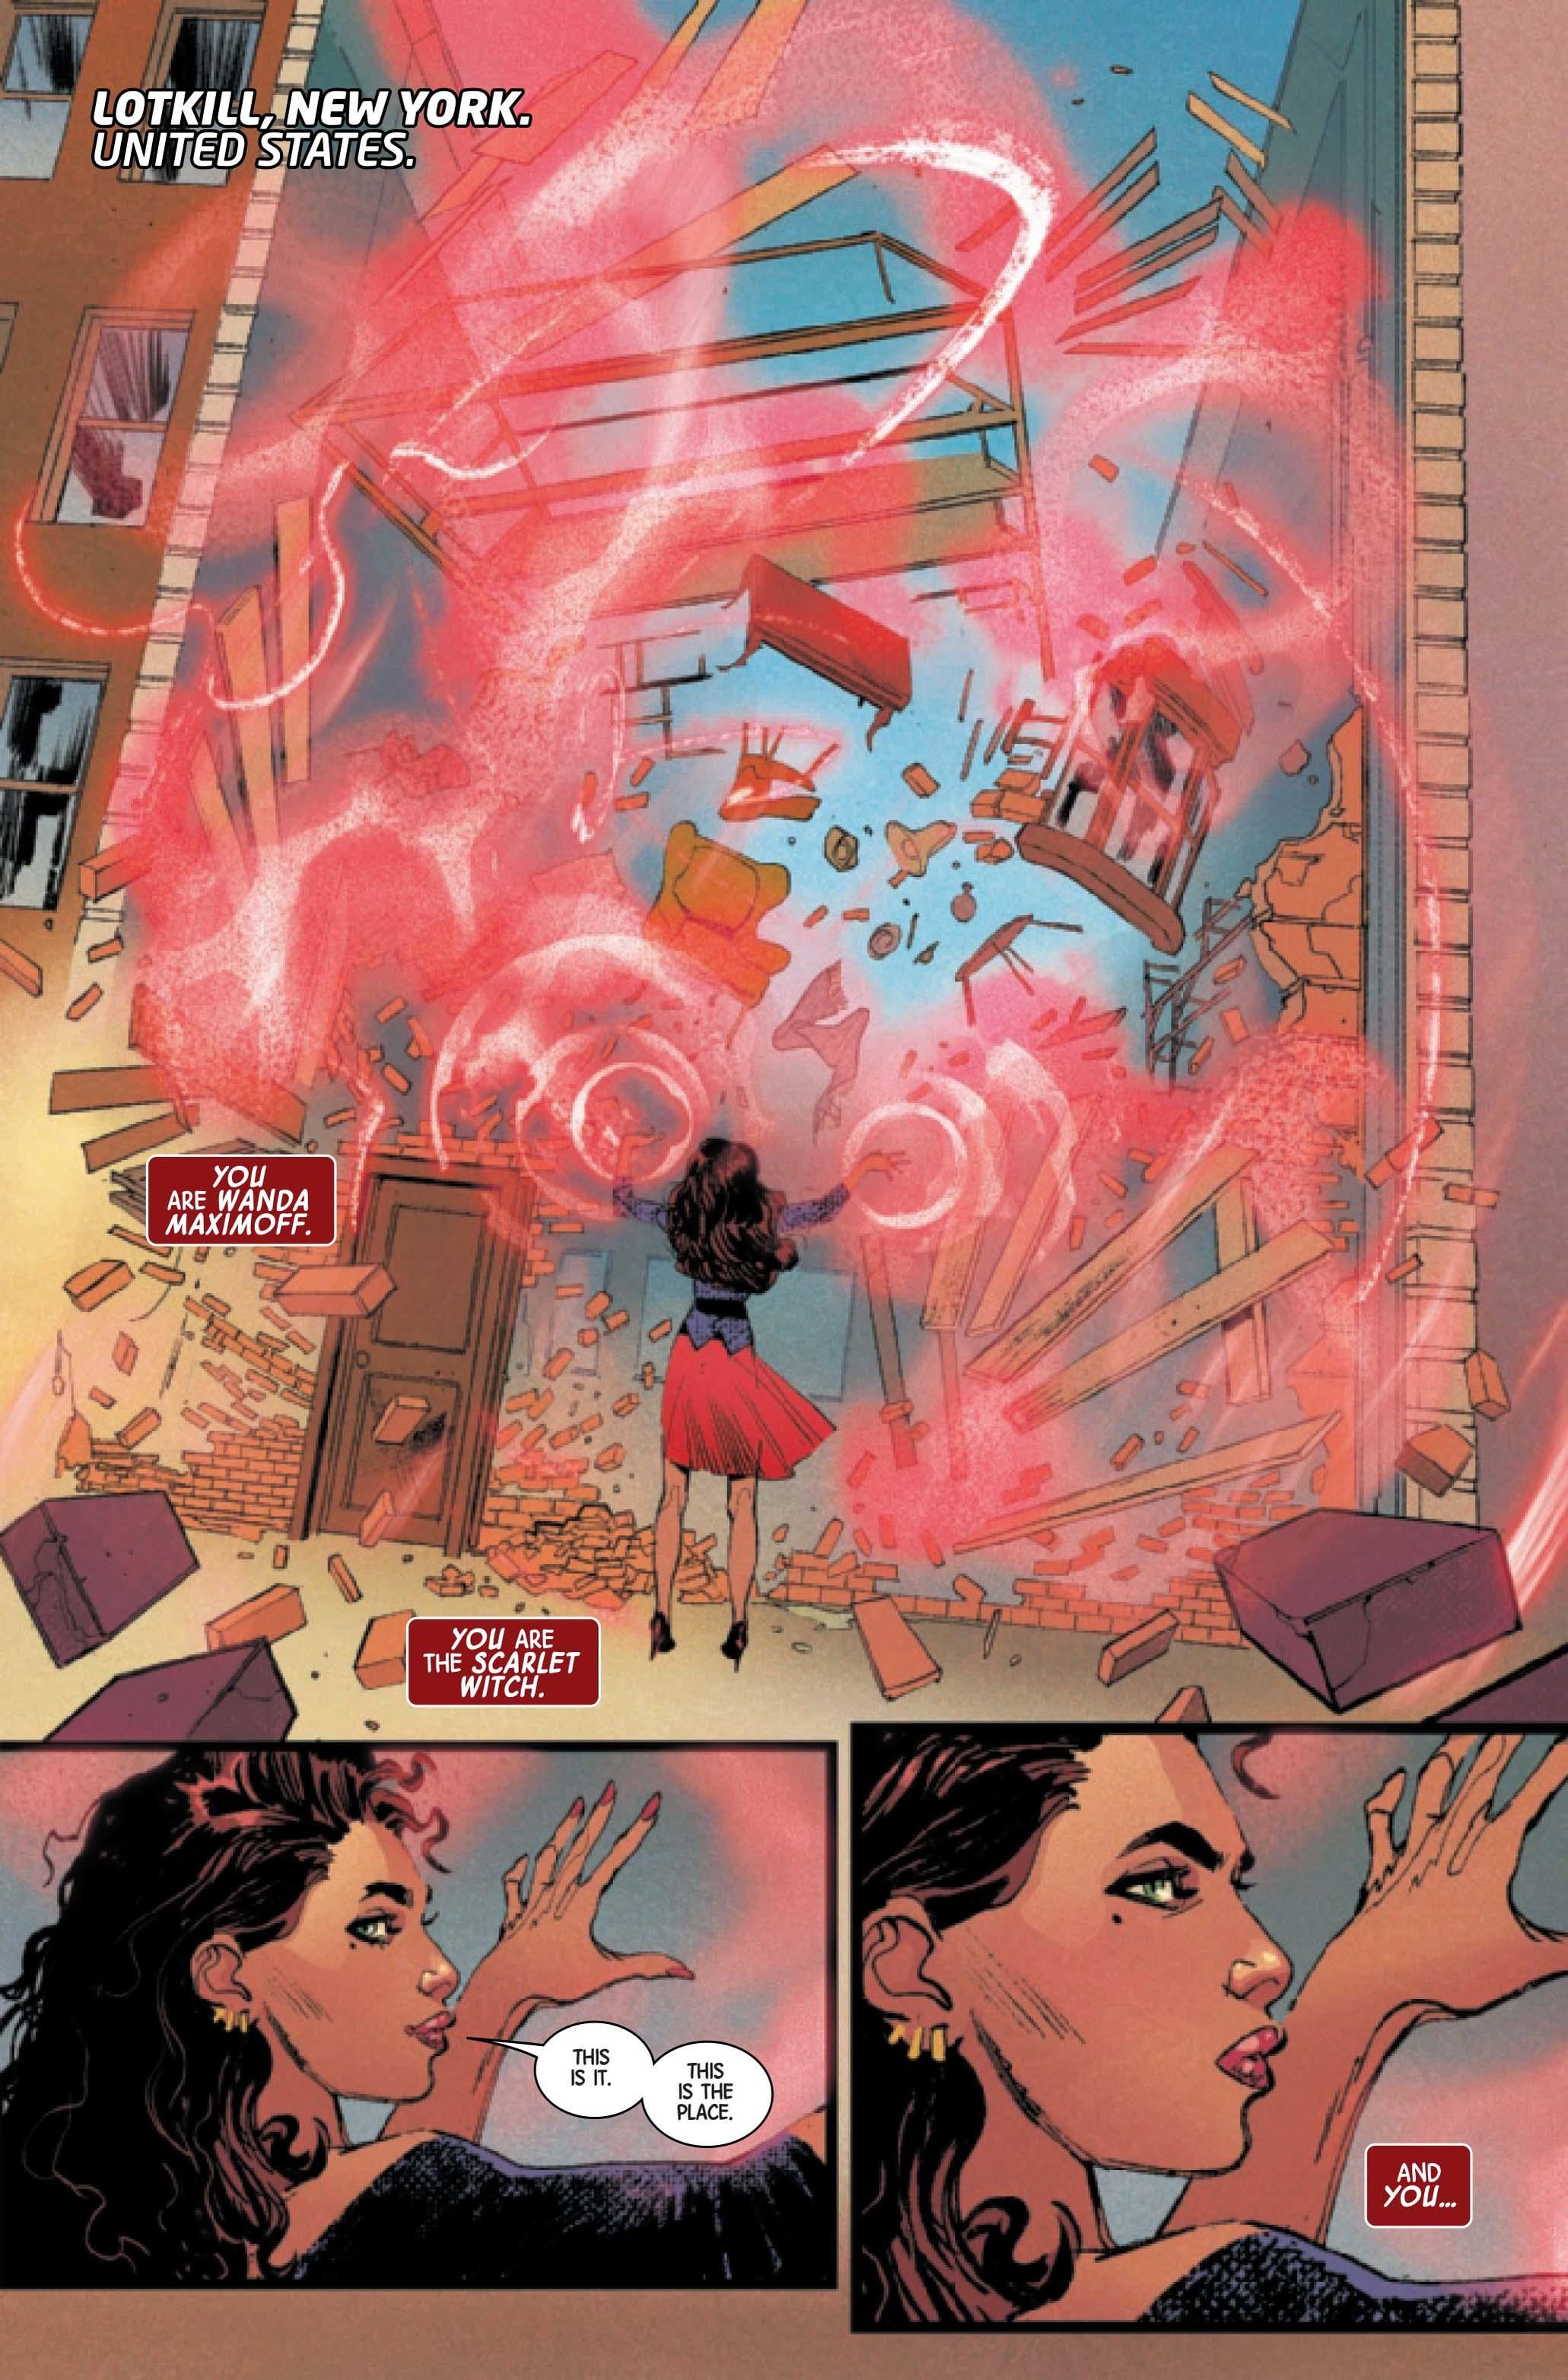 Scarlet Witch (2015) #1, Comic Issues